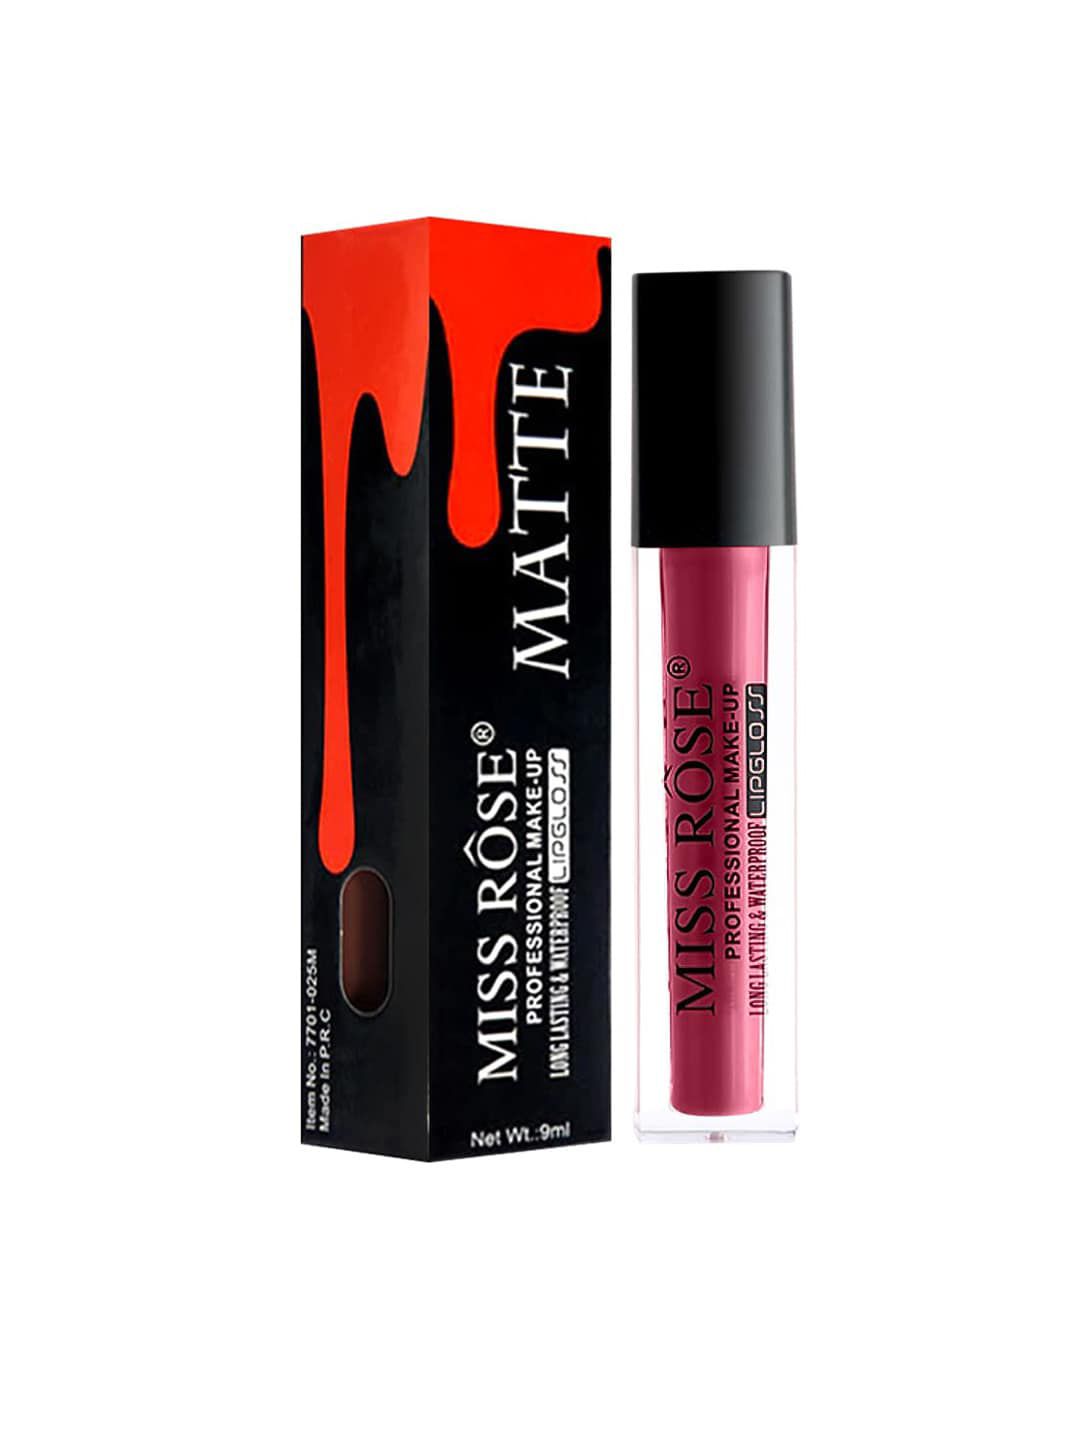 MISS ROSE Shiny Liquid LipGloss 7701-020 03 20 gm Price in India